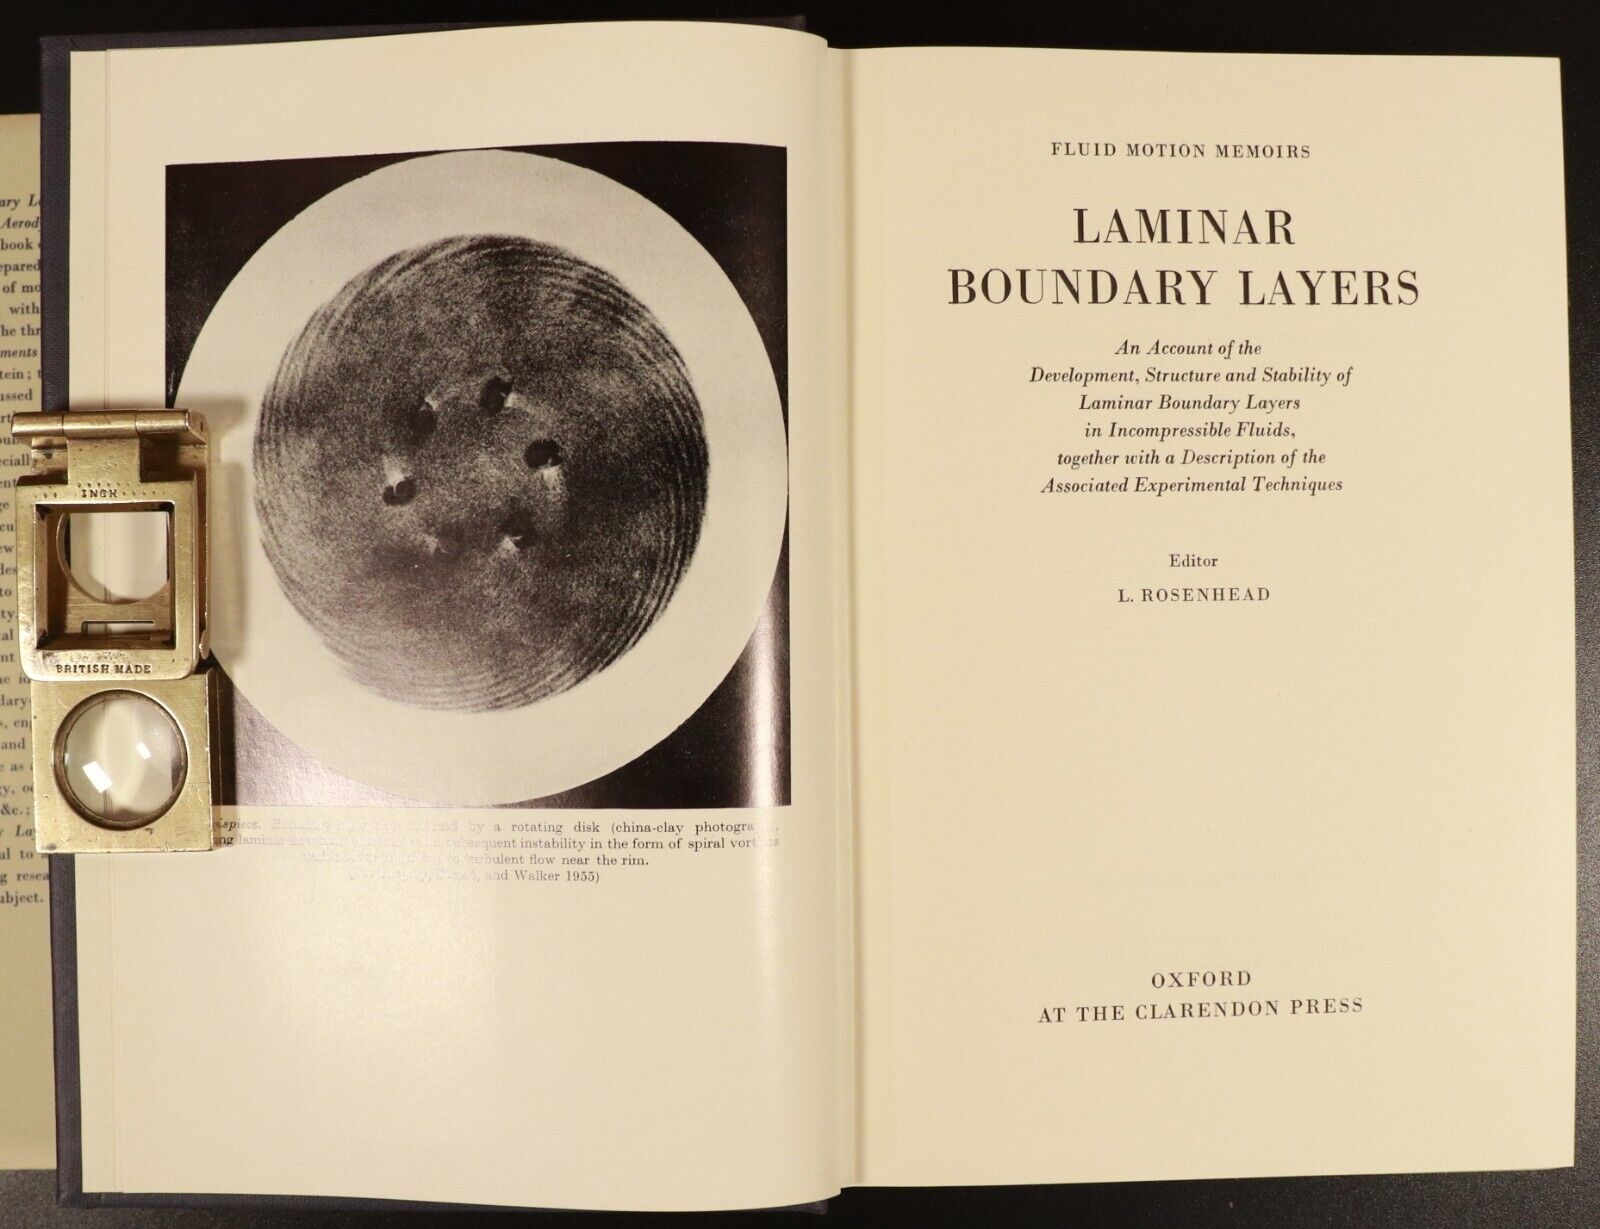 1966 Laminar Boundary Layers by L. Rosenhead Vintage Science Reference Book - 0